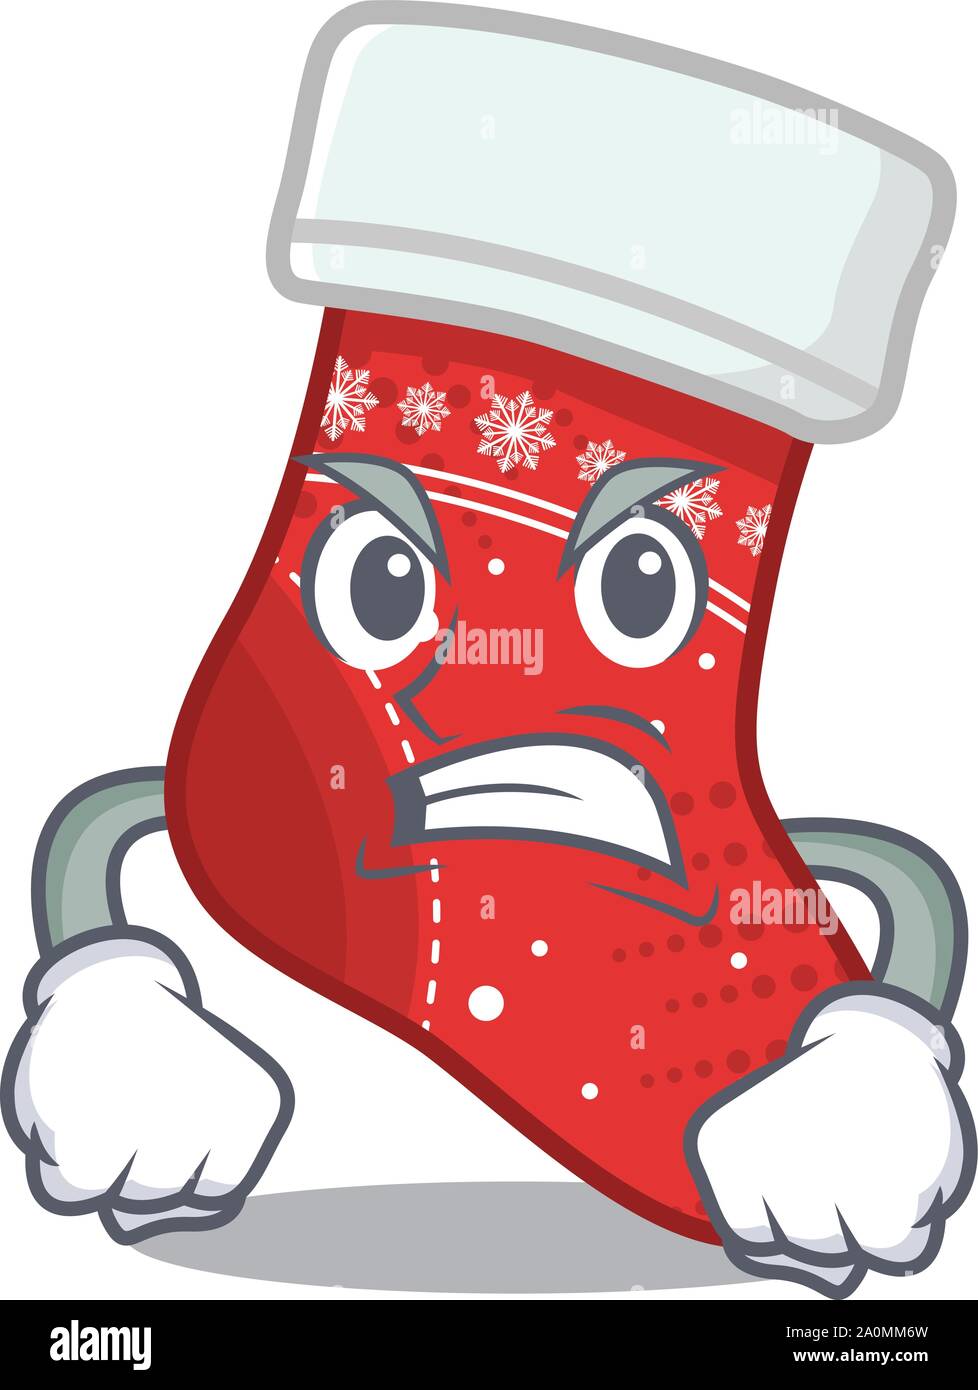 Angry christmas stocking character shaped in cartoon Stock Vector Image ...